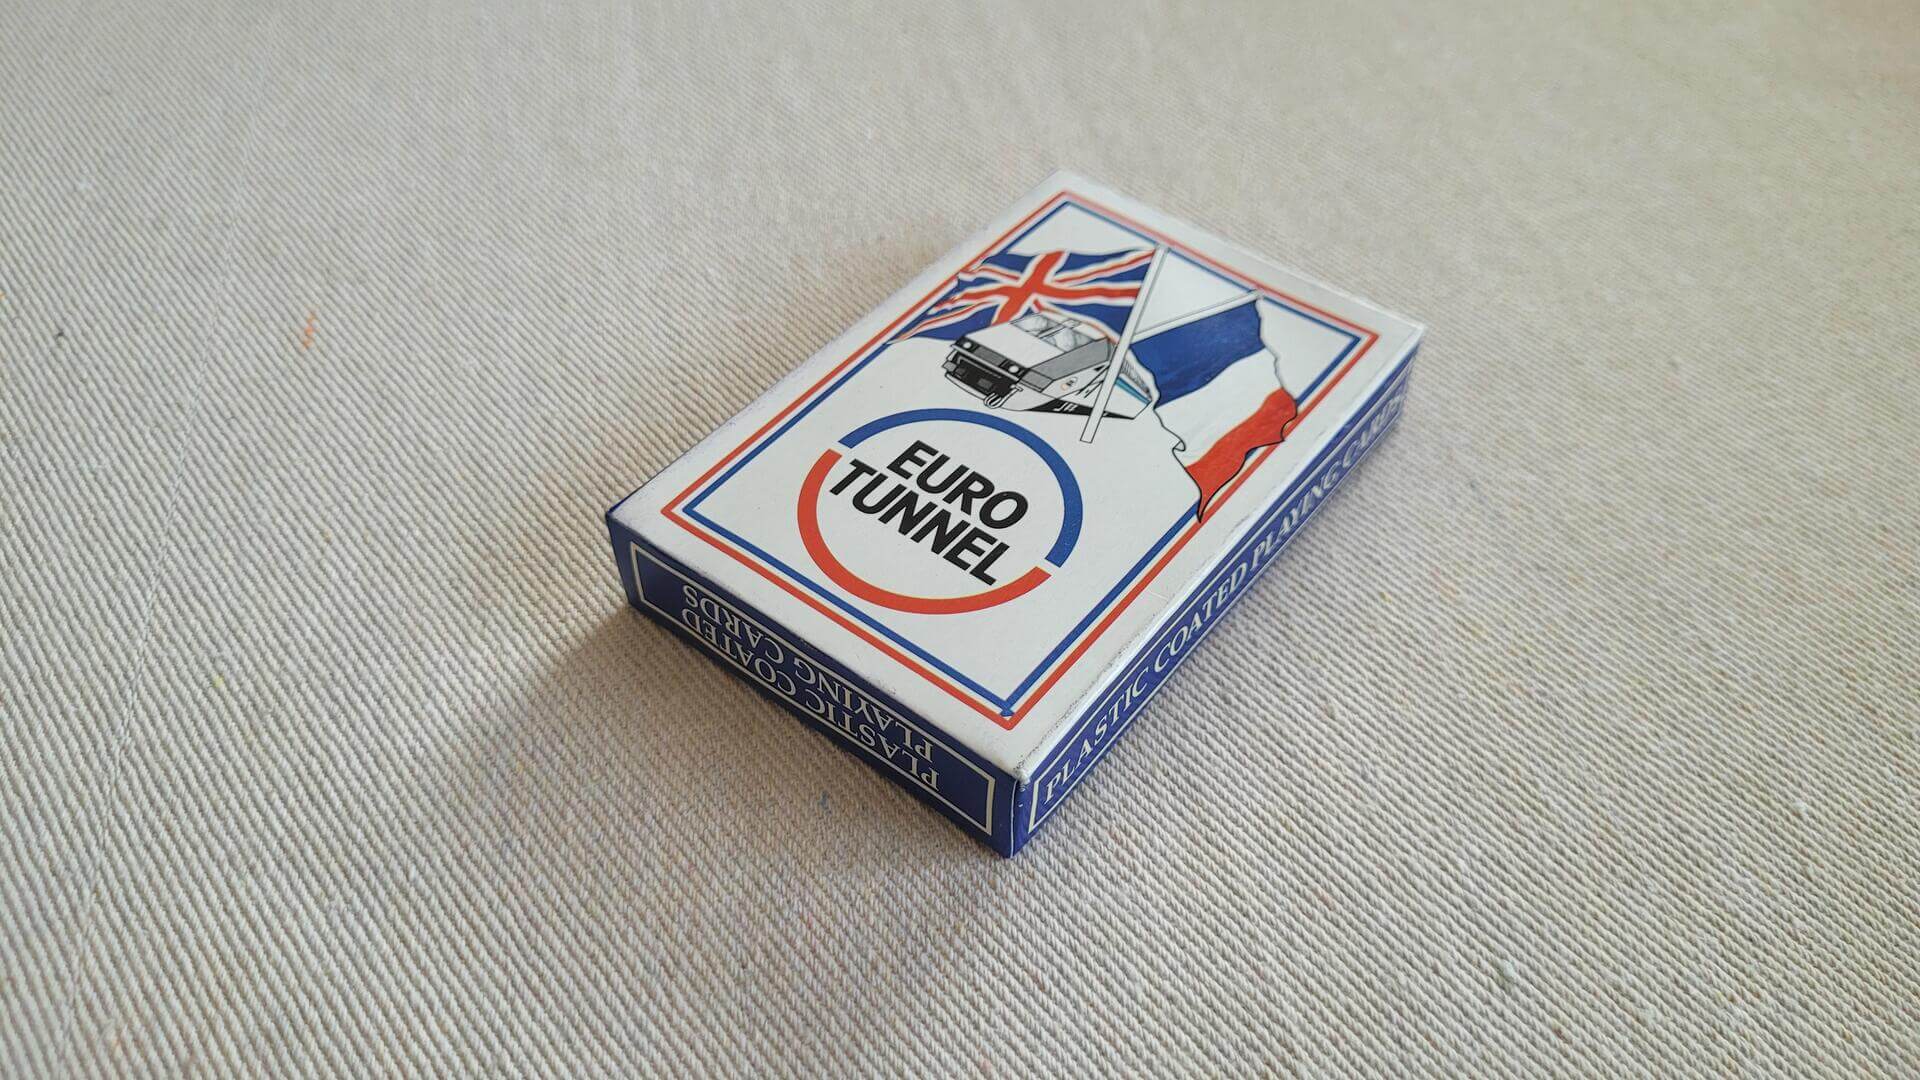 1990s vintage Eurotunnel playing cards by Sampson's Destination Gifts. Collectible original ephemera celebrating Channel Tunnel that links England to France